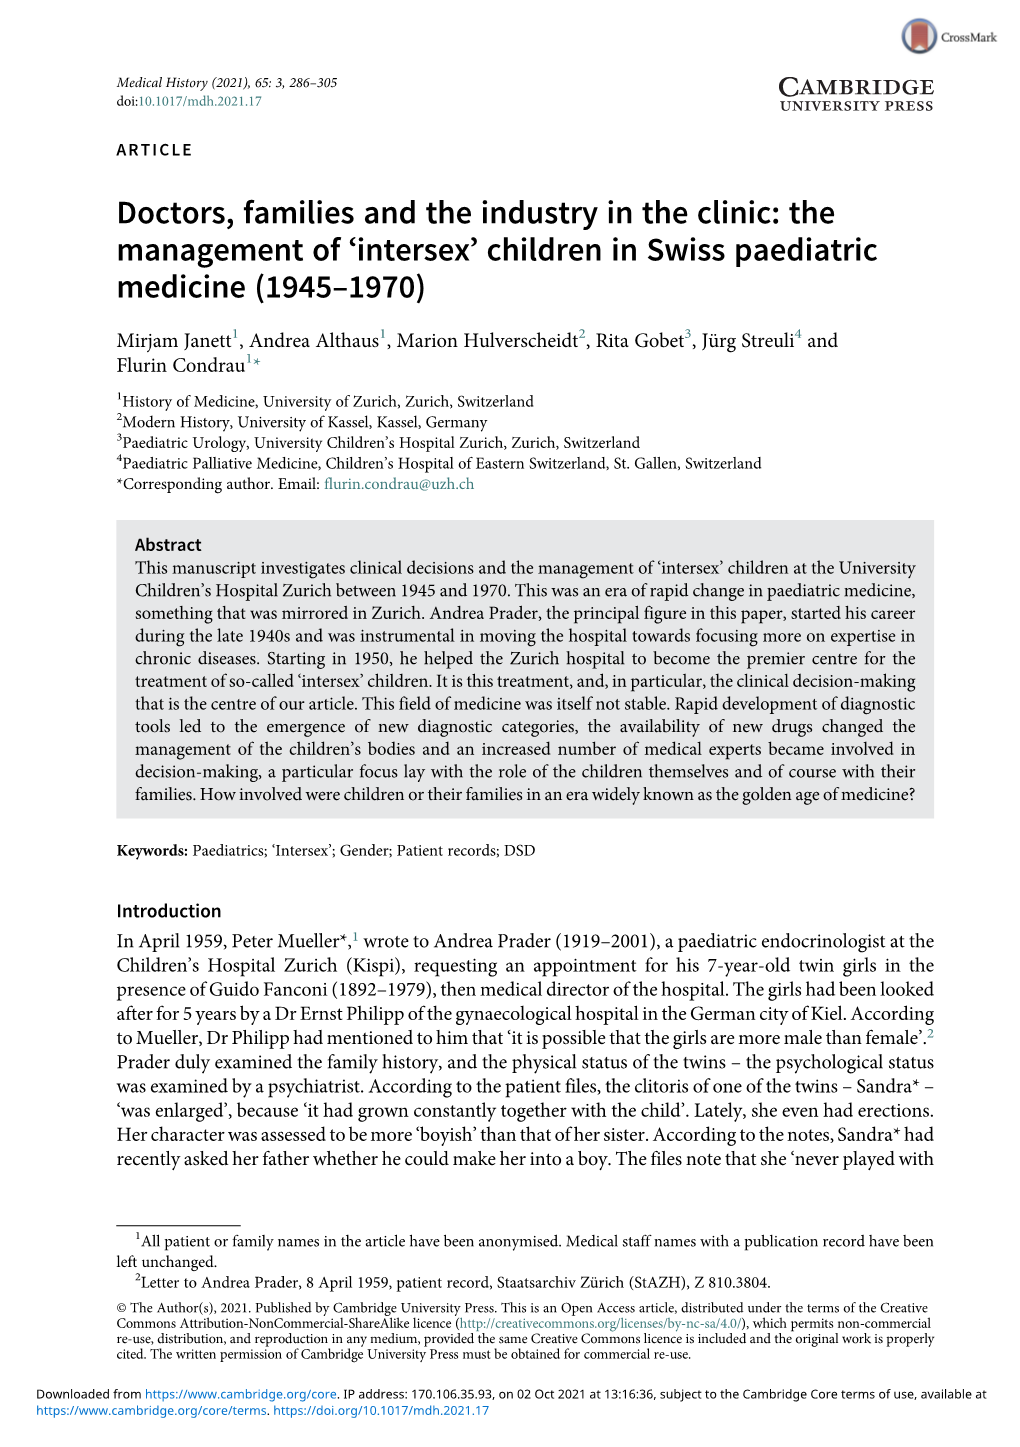 Doctors, Families and the Industry in the Clinic: the Management of ‘Intersex’ Children in Swiss Paediatric Medicine (1945–1970)